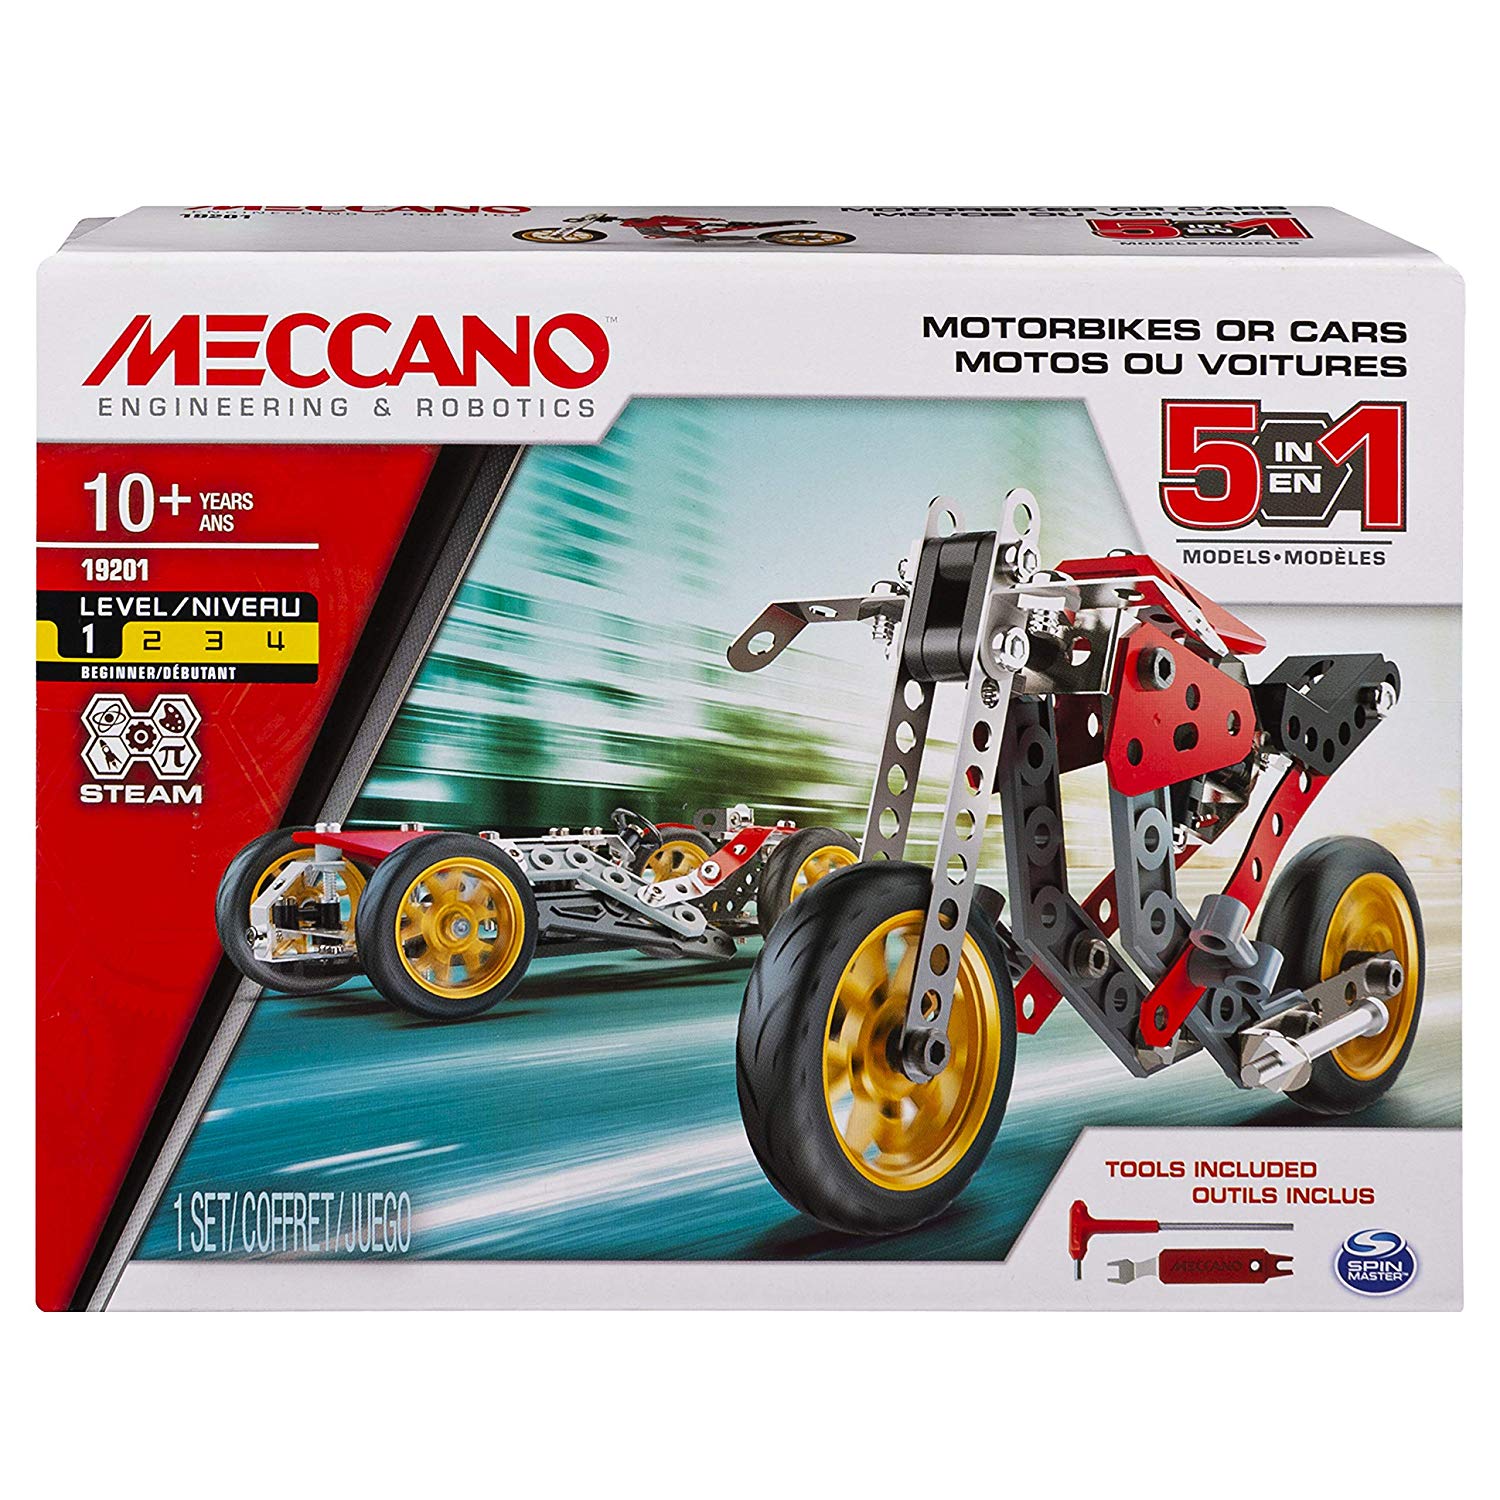 meccano for 5 year olds